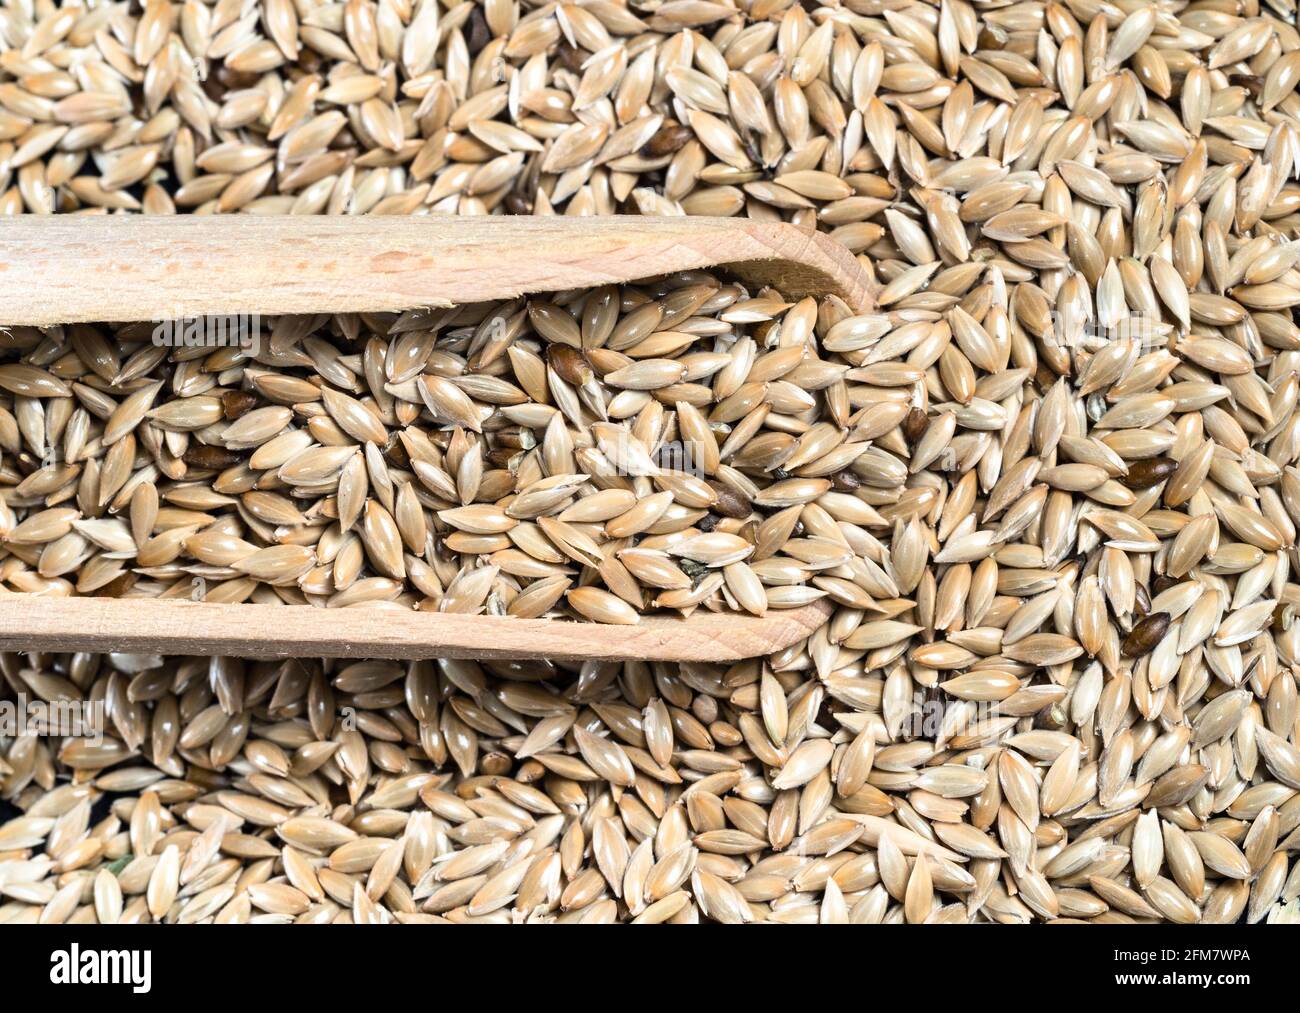 top view of wood scoop on pile of unhulled scagliola canary seeds closeup Stock Photo